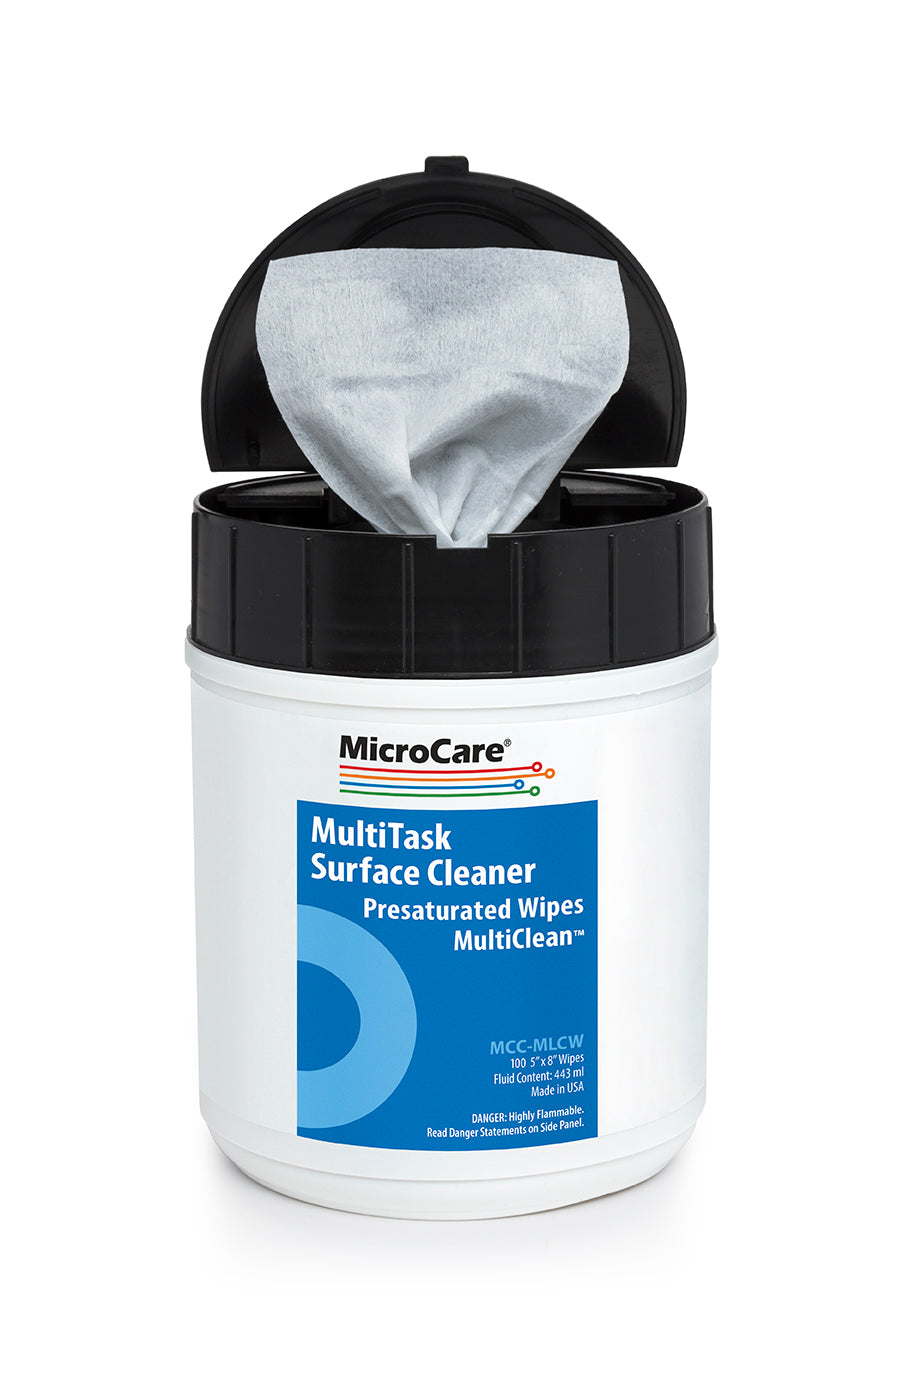 MicroCare MCC-MLCW 70% Isopropyl Alcohol Disinfecting Wipes with MultiClean, Tub of 100 Wipes